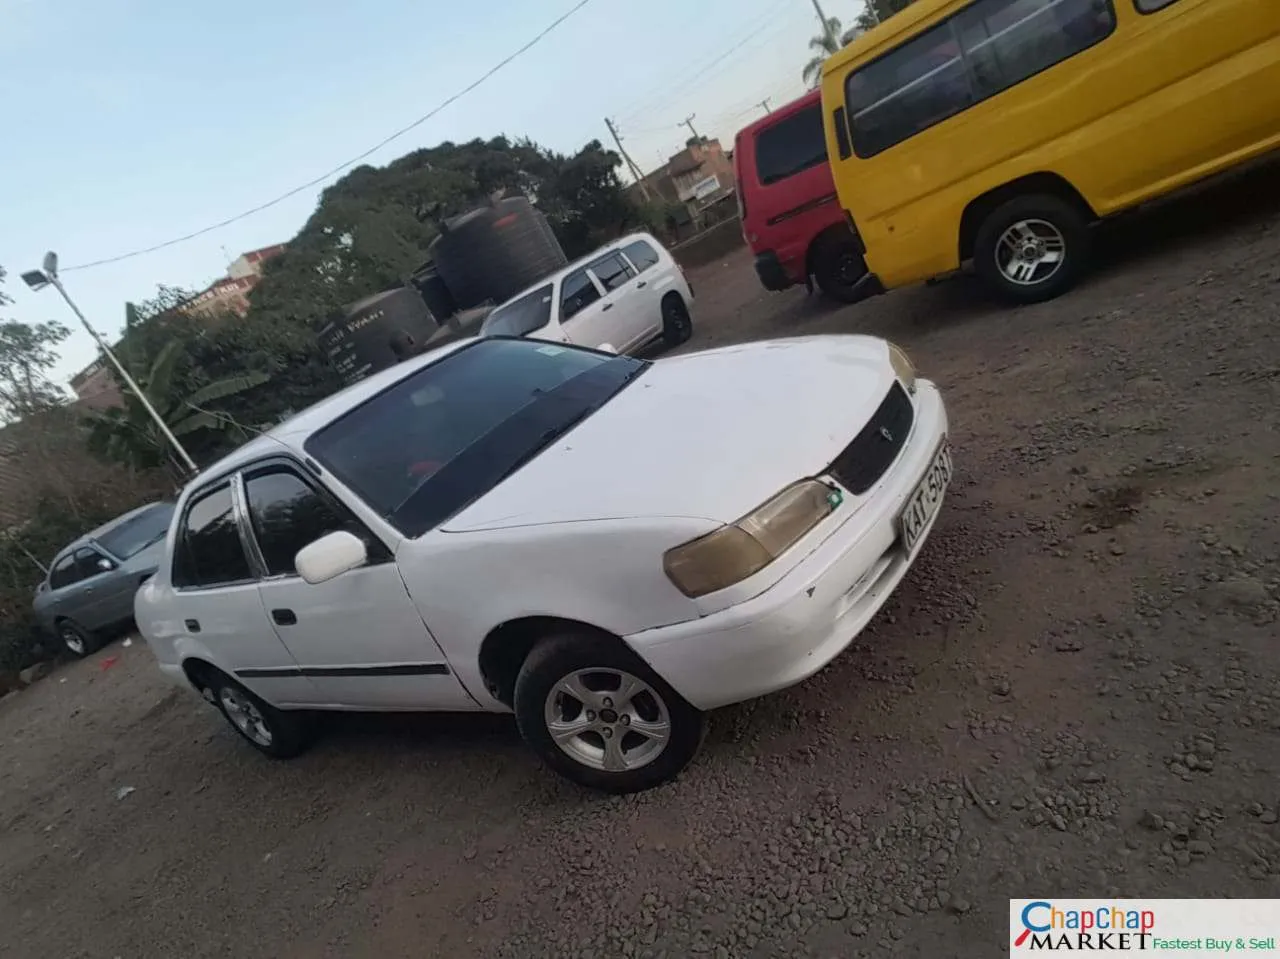 Toyota Corolla 110 kenya 230k ONLY You Pay 30% Deposit Trade in OK Wow Corolla 110 for sale in kenya hire purchase installments EXCLUSIVE